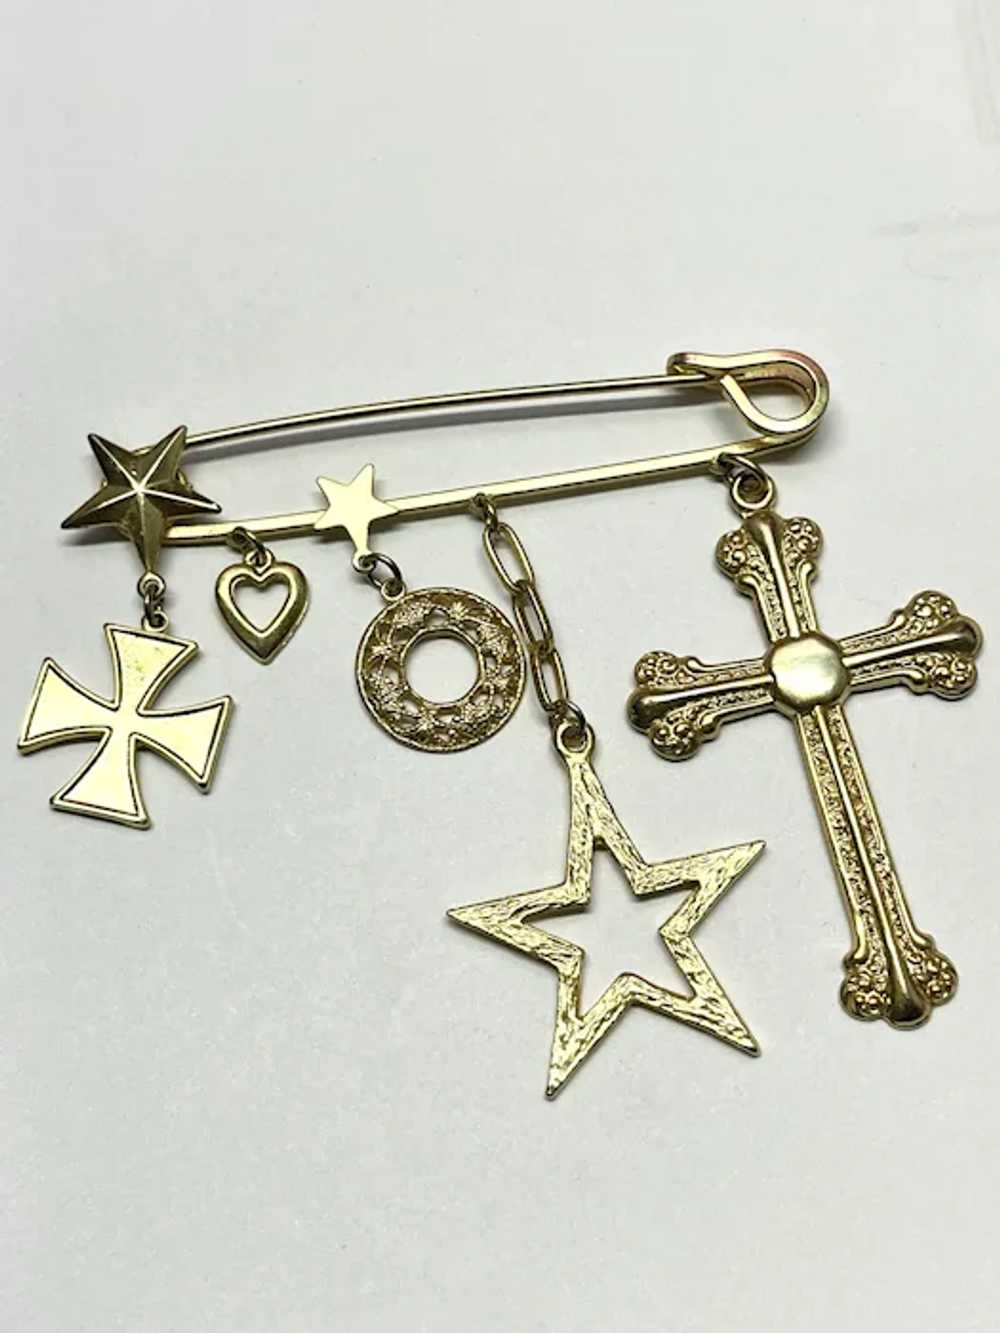 Vintage Gold Safety Pin Charm Brooch Pin - image 2